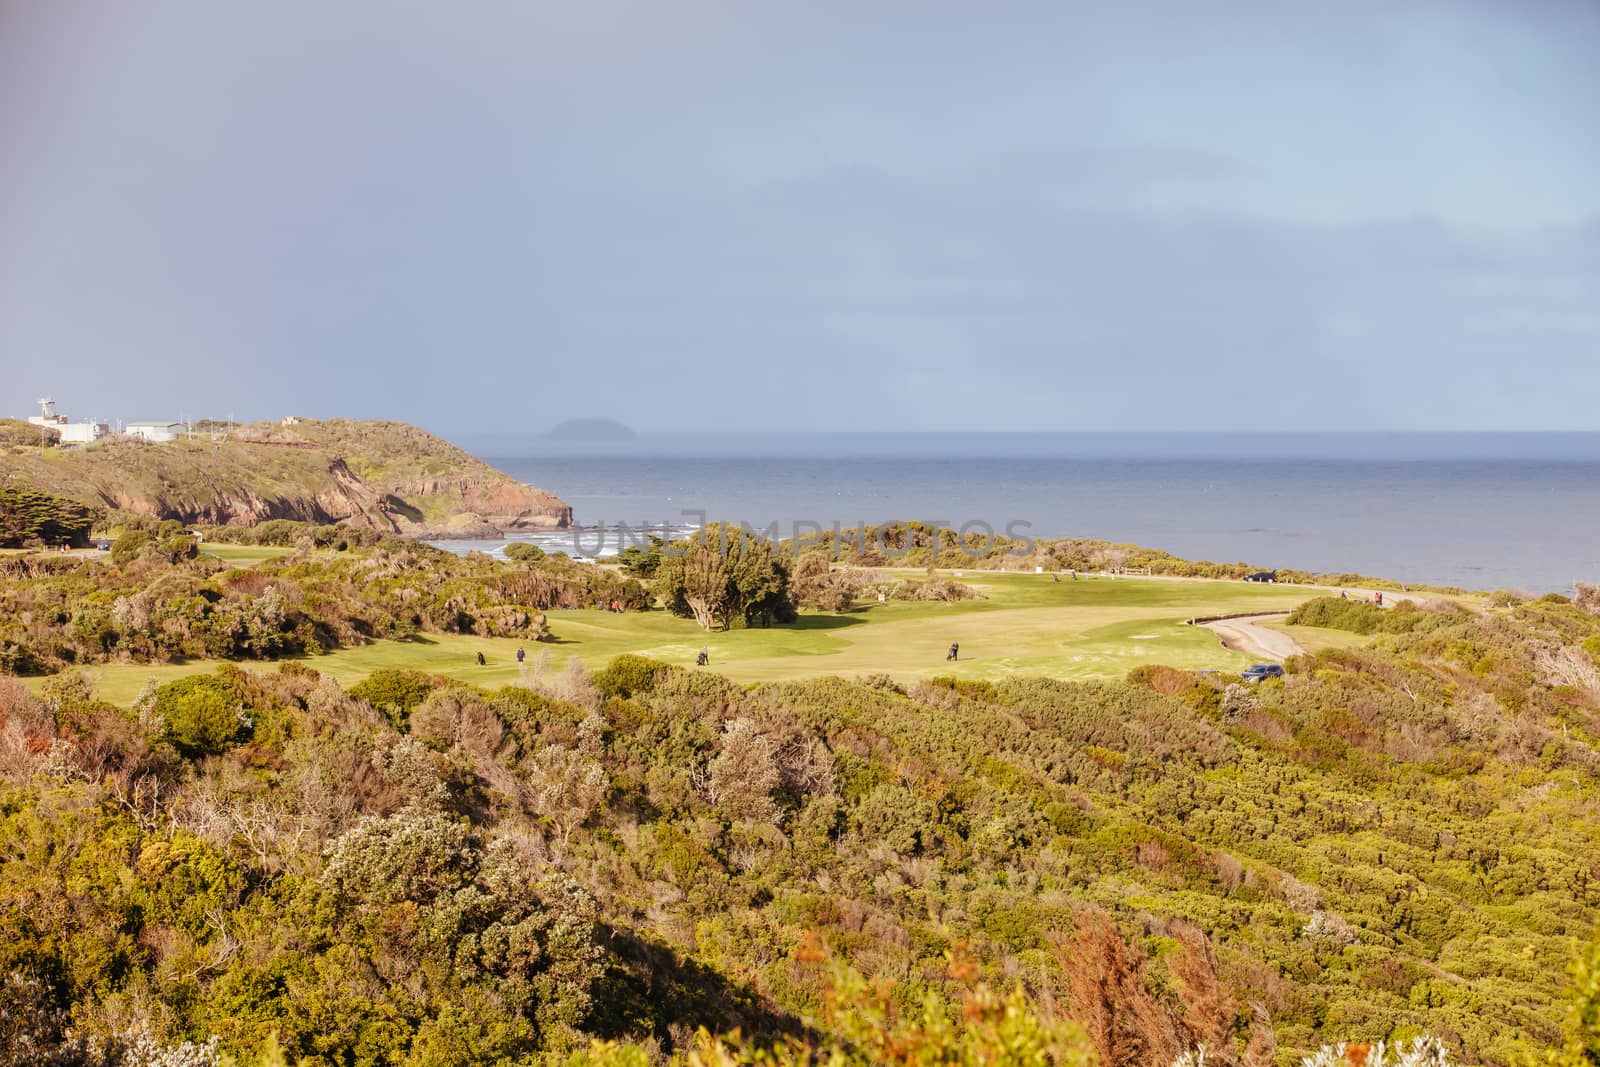 Flinders Golf Course and coastline in the Mornington Peninsula on a winter's afternoon in Victoria, Australia